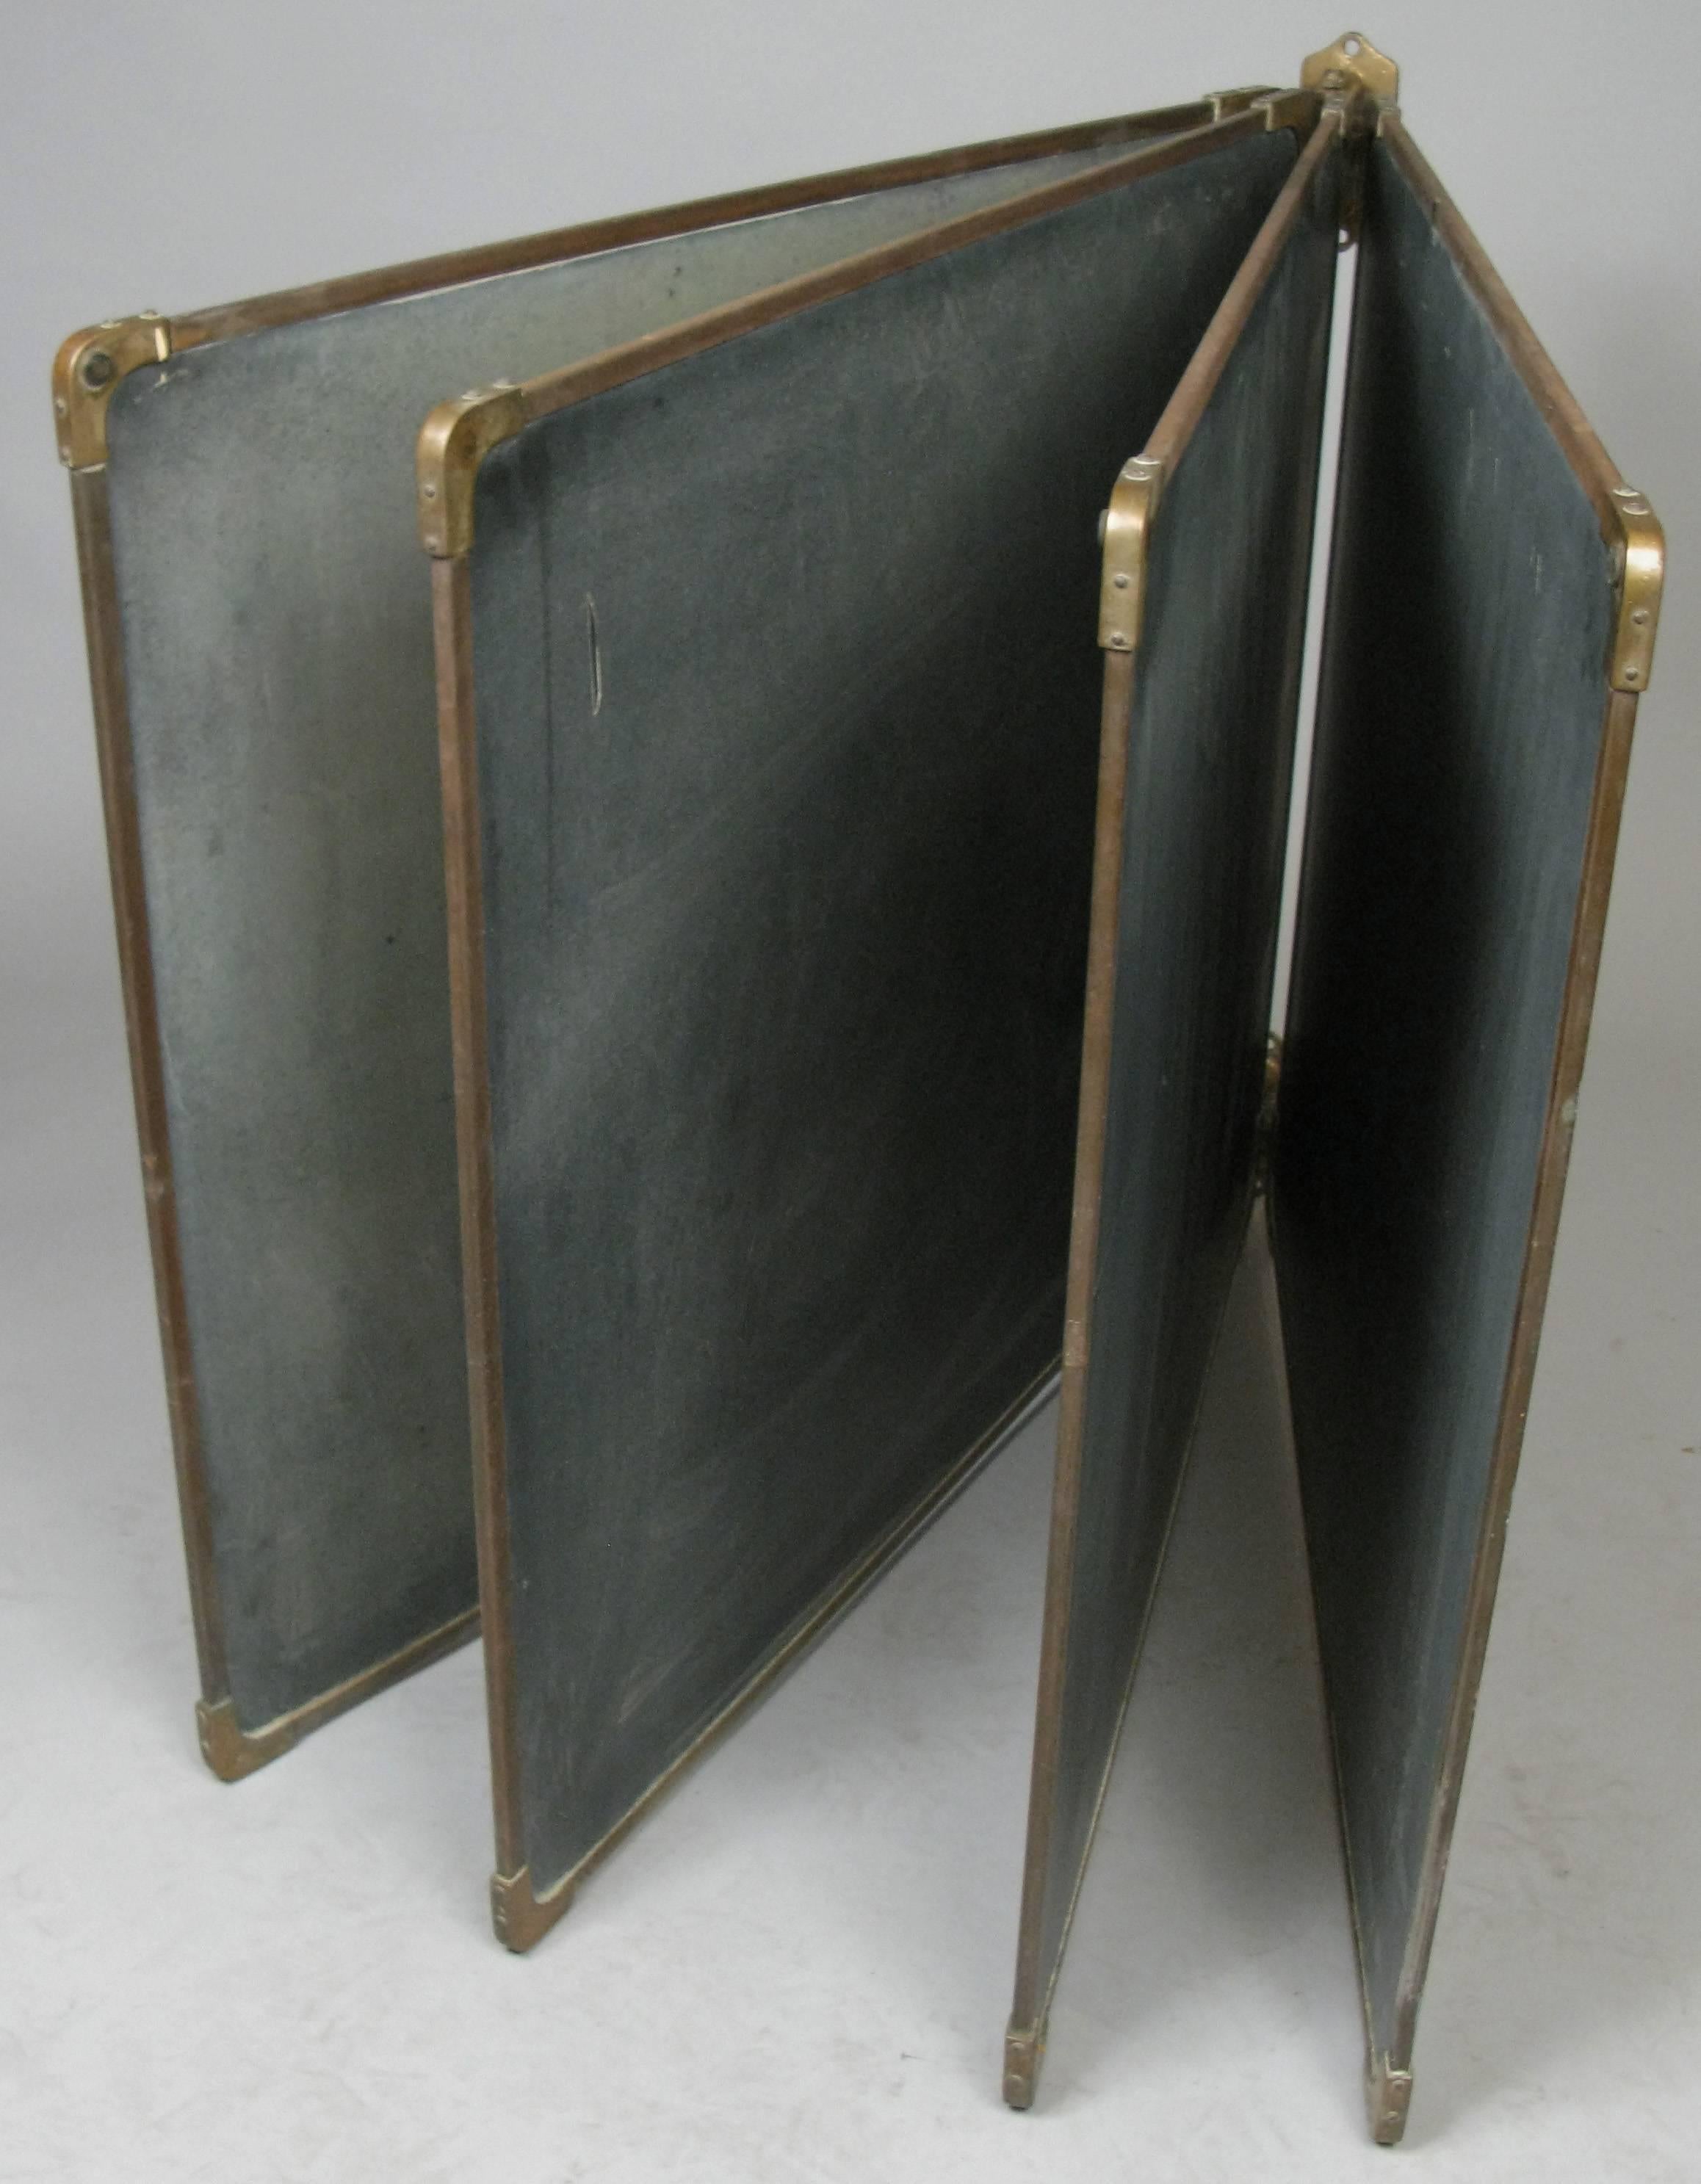 An outstanding set of antique slate chalkboards in their original frames with bronze corners, along with the bronze wall mounted brackets that hold them all and allow them to pivot to use both sides of the boards. Beautiful set in very good